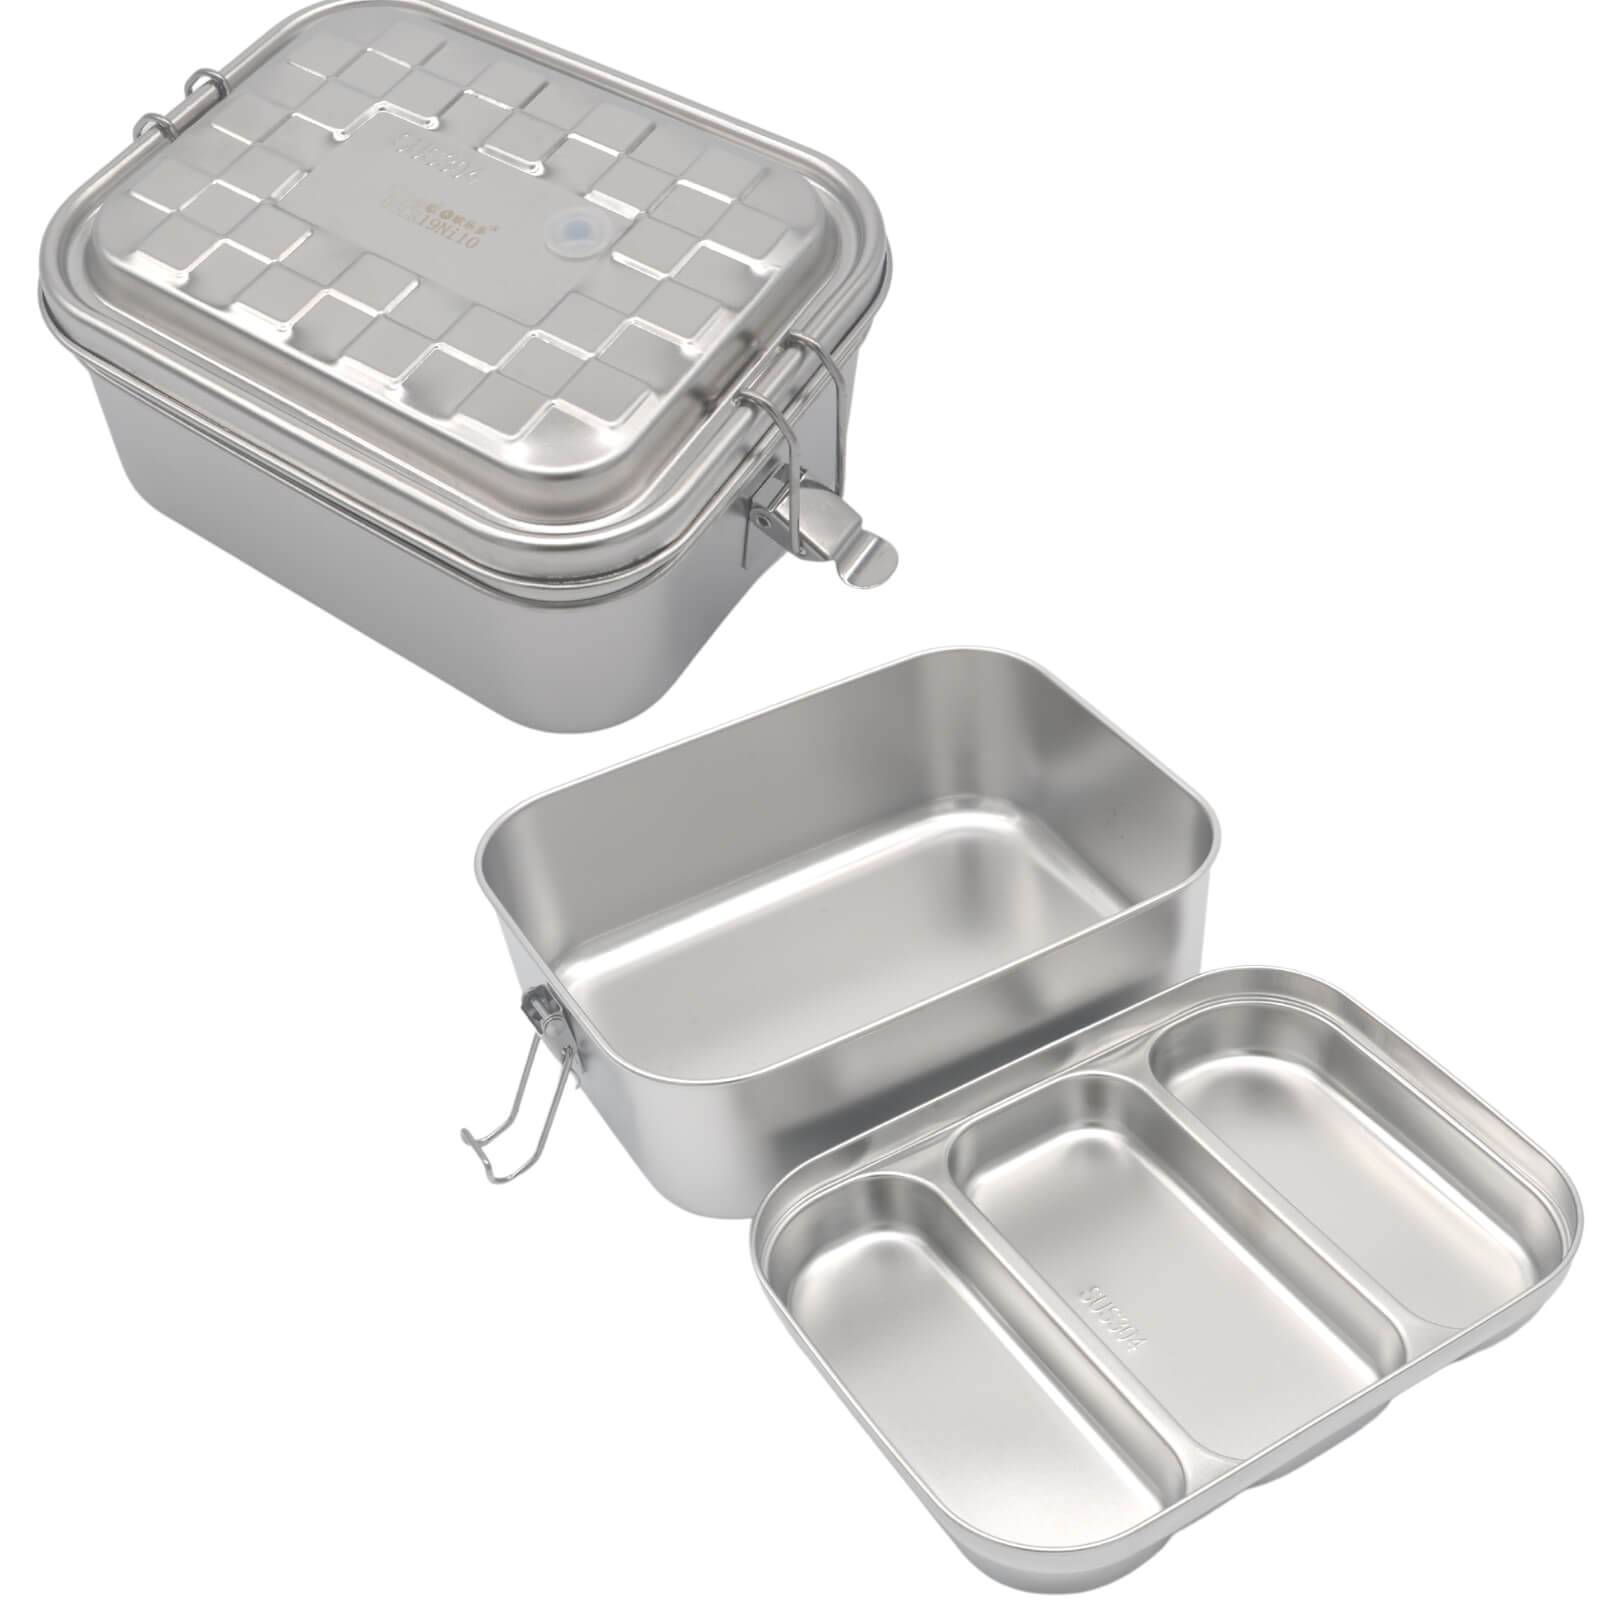  304 Stainless Steel Bento Lunch Box Three Grids details